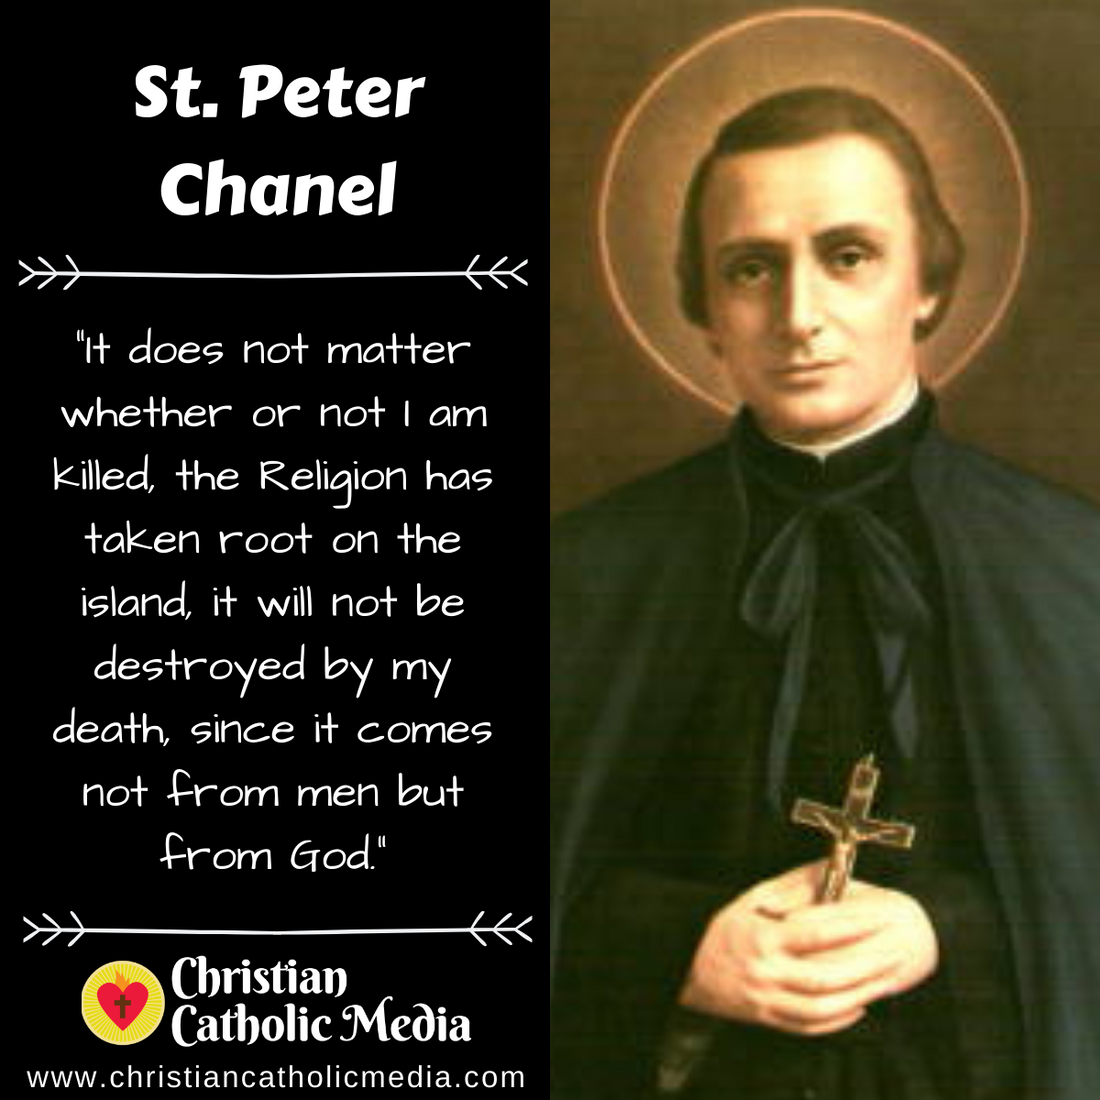 St. Peter Chanel - Wednesday April 28, 2021